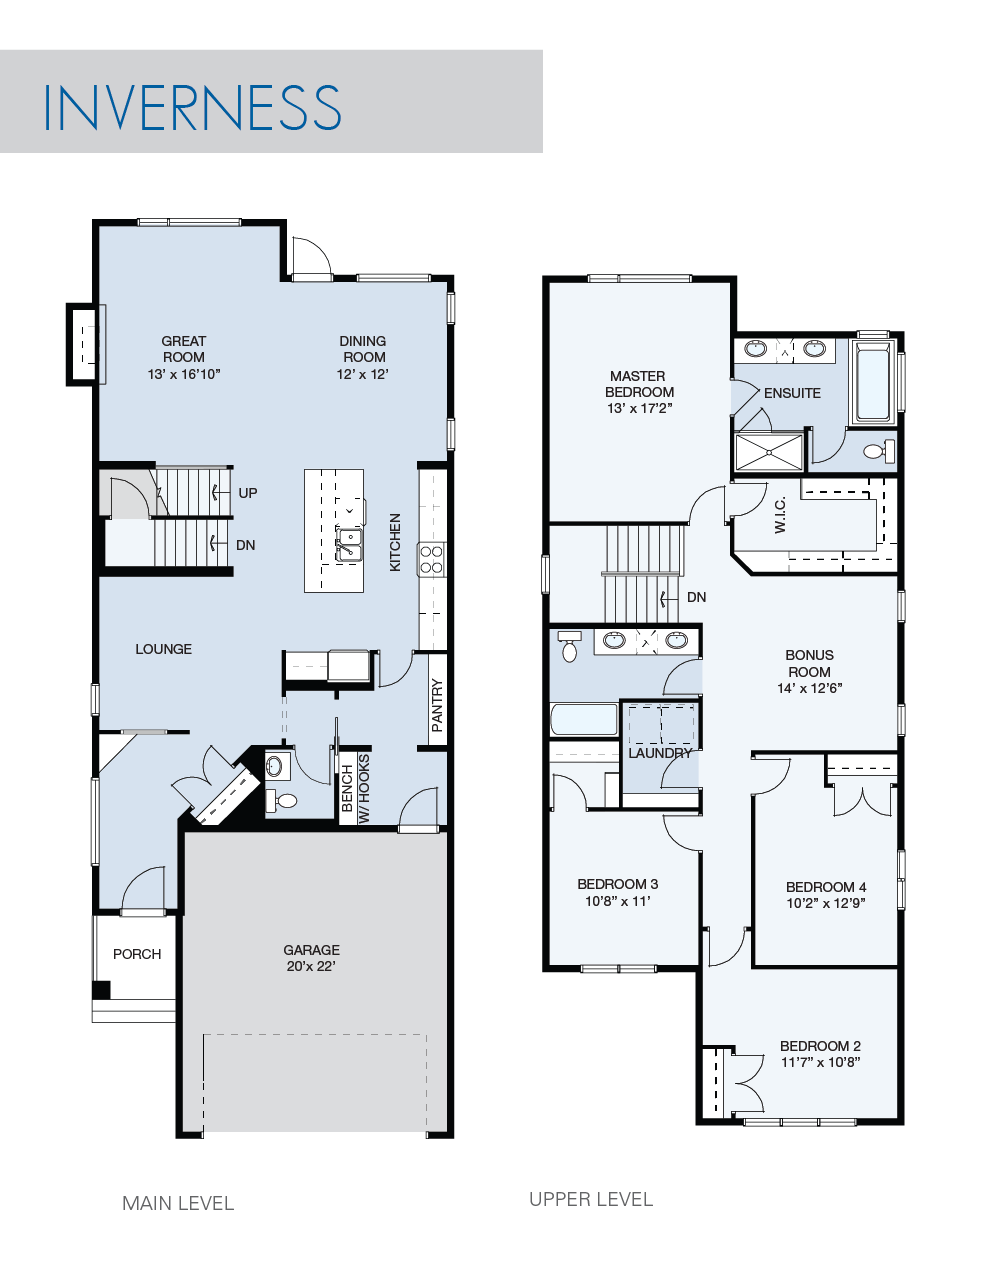 Floor plan for the Inverness model home